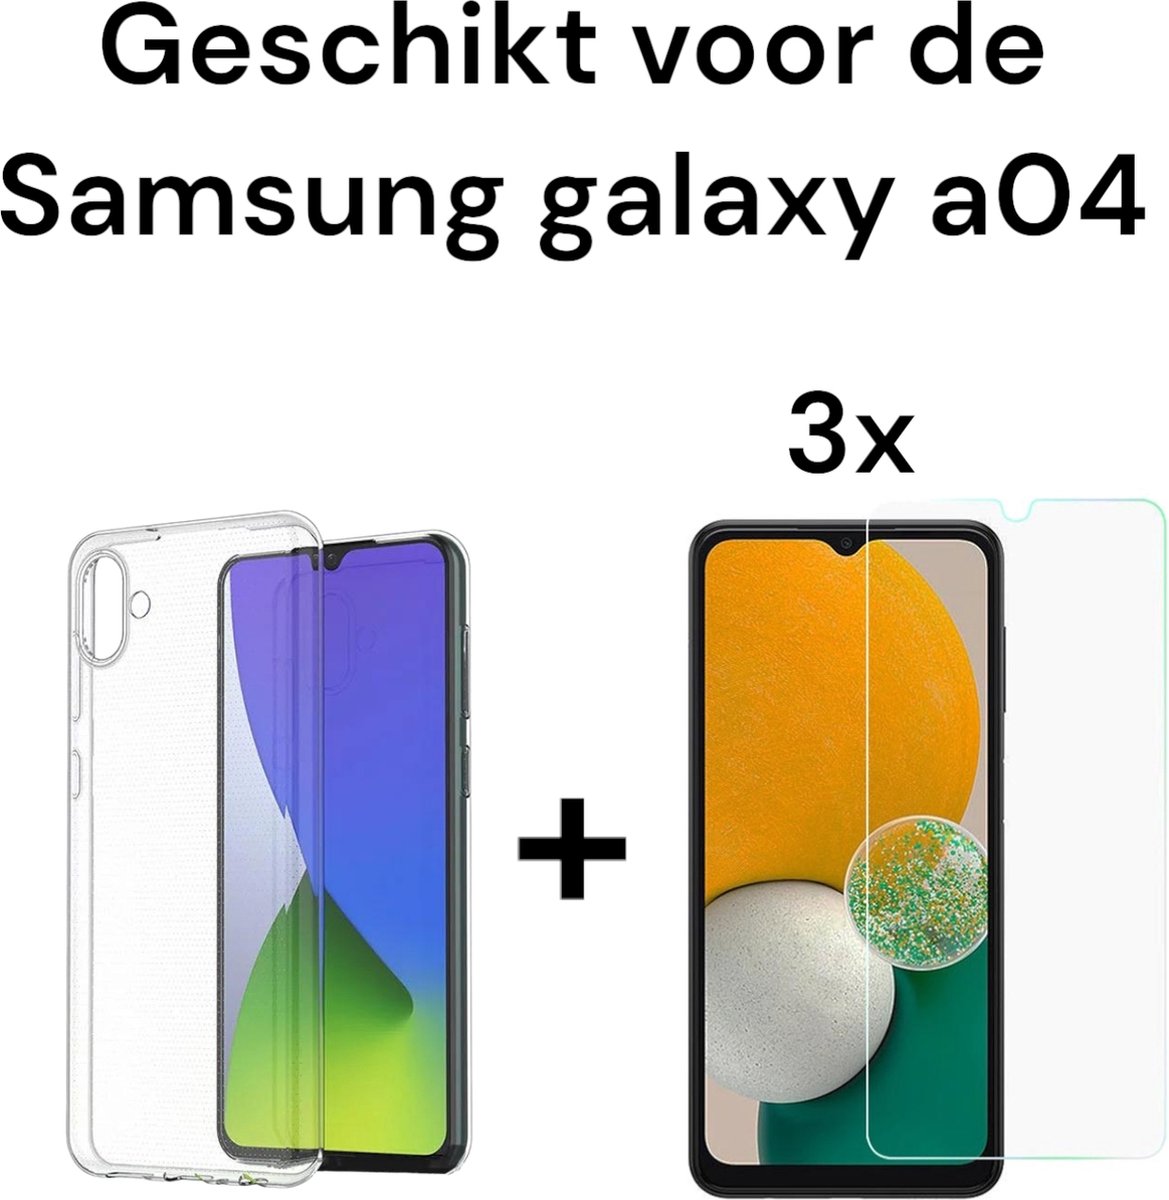 Samsung Galaxy A04 - Doorzichtig siliconen hoesje achterkantje +3x screen protector - Transparant back cover +3x tempered glass